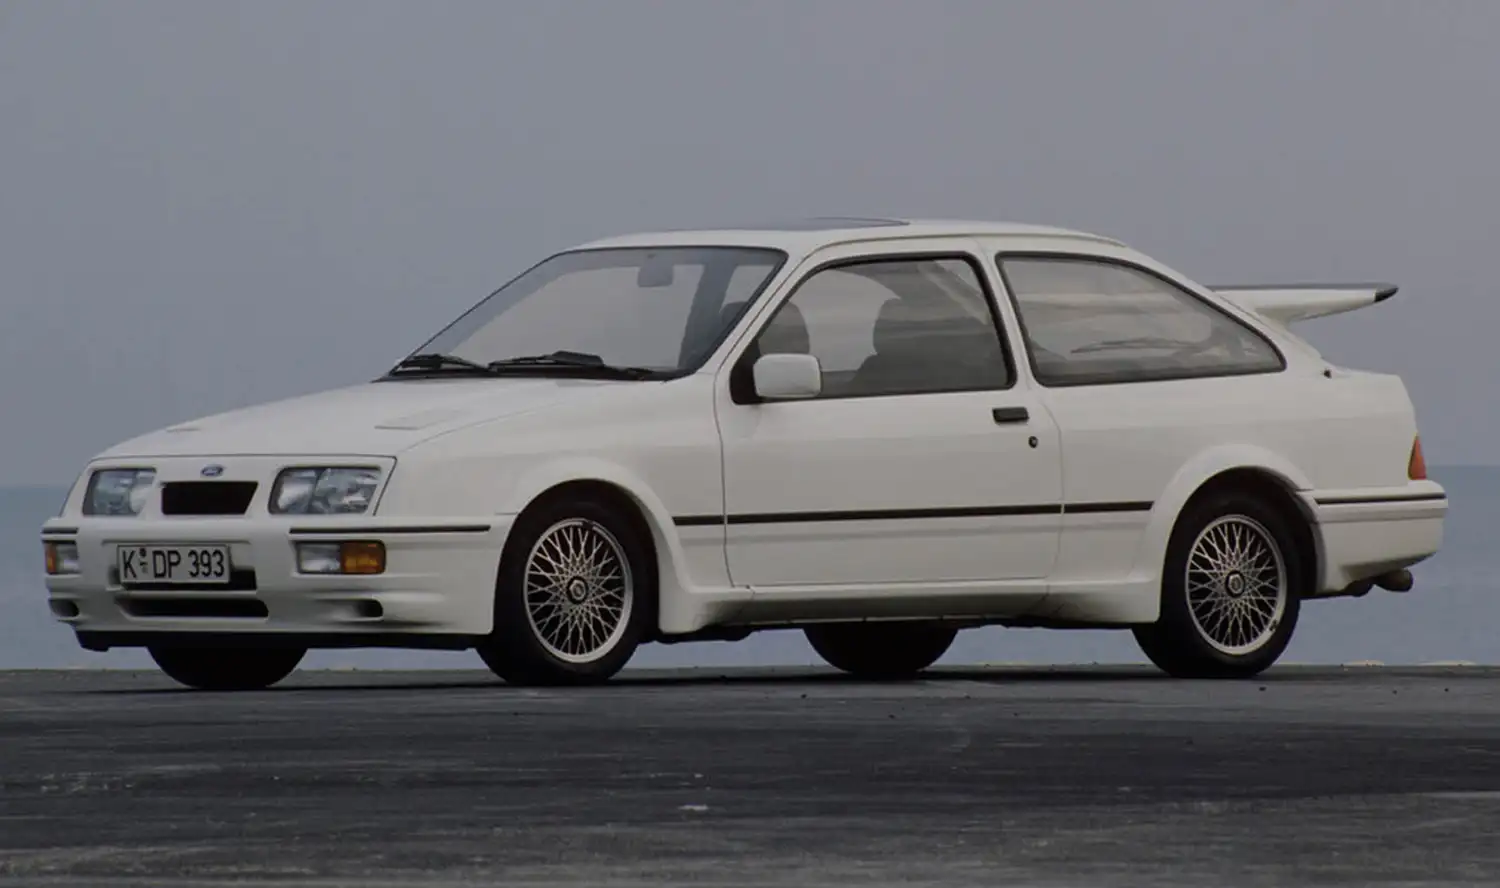 1985 Ford Sierra RS Cosworth: Iconic Speed and Style